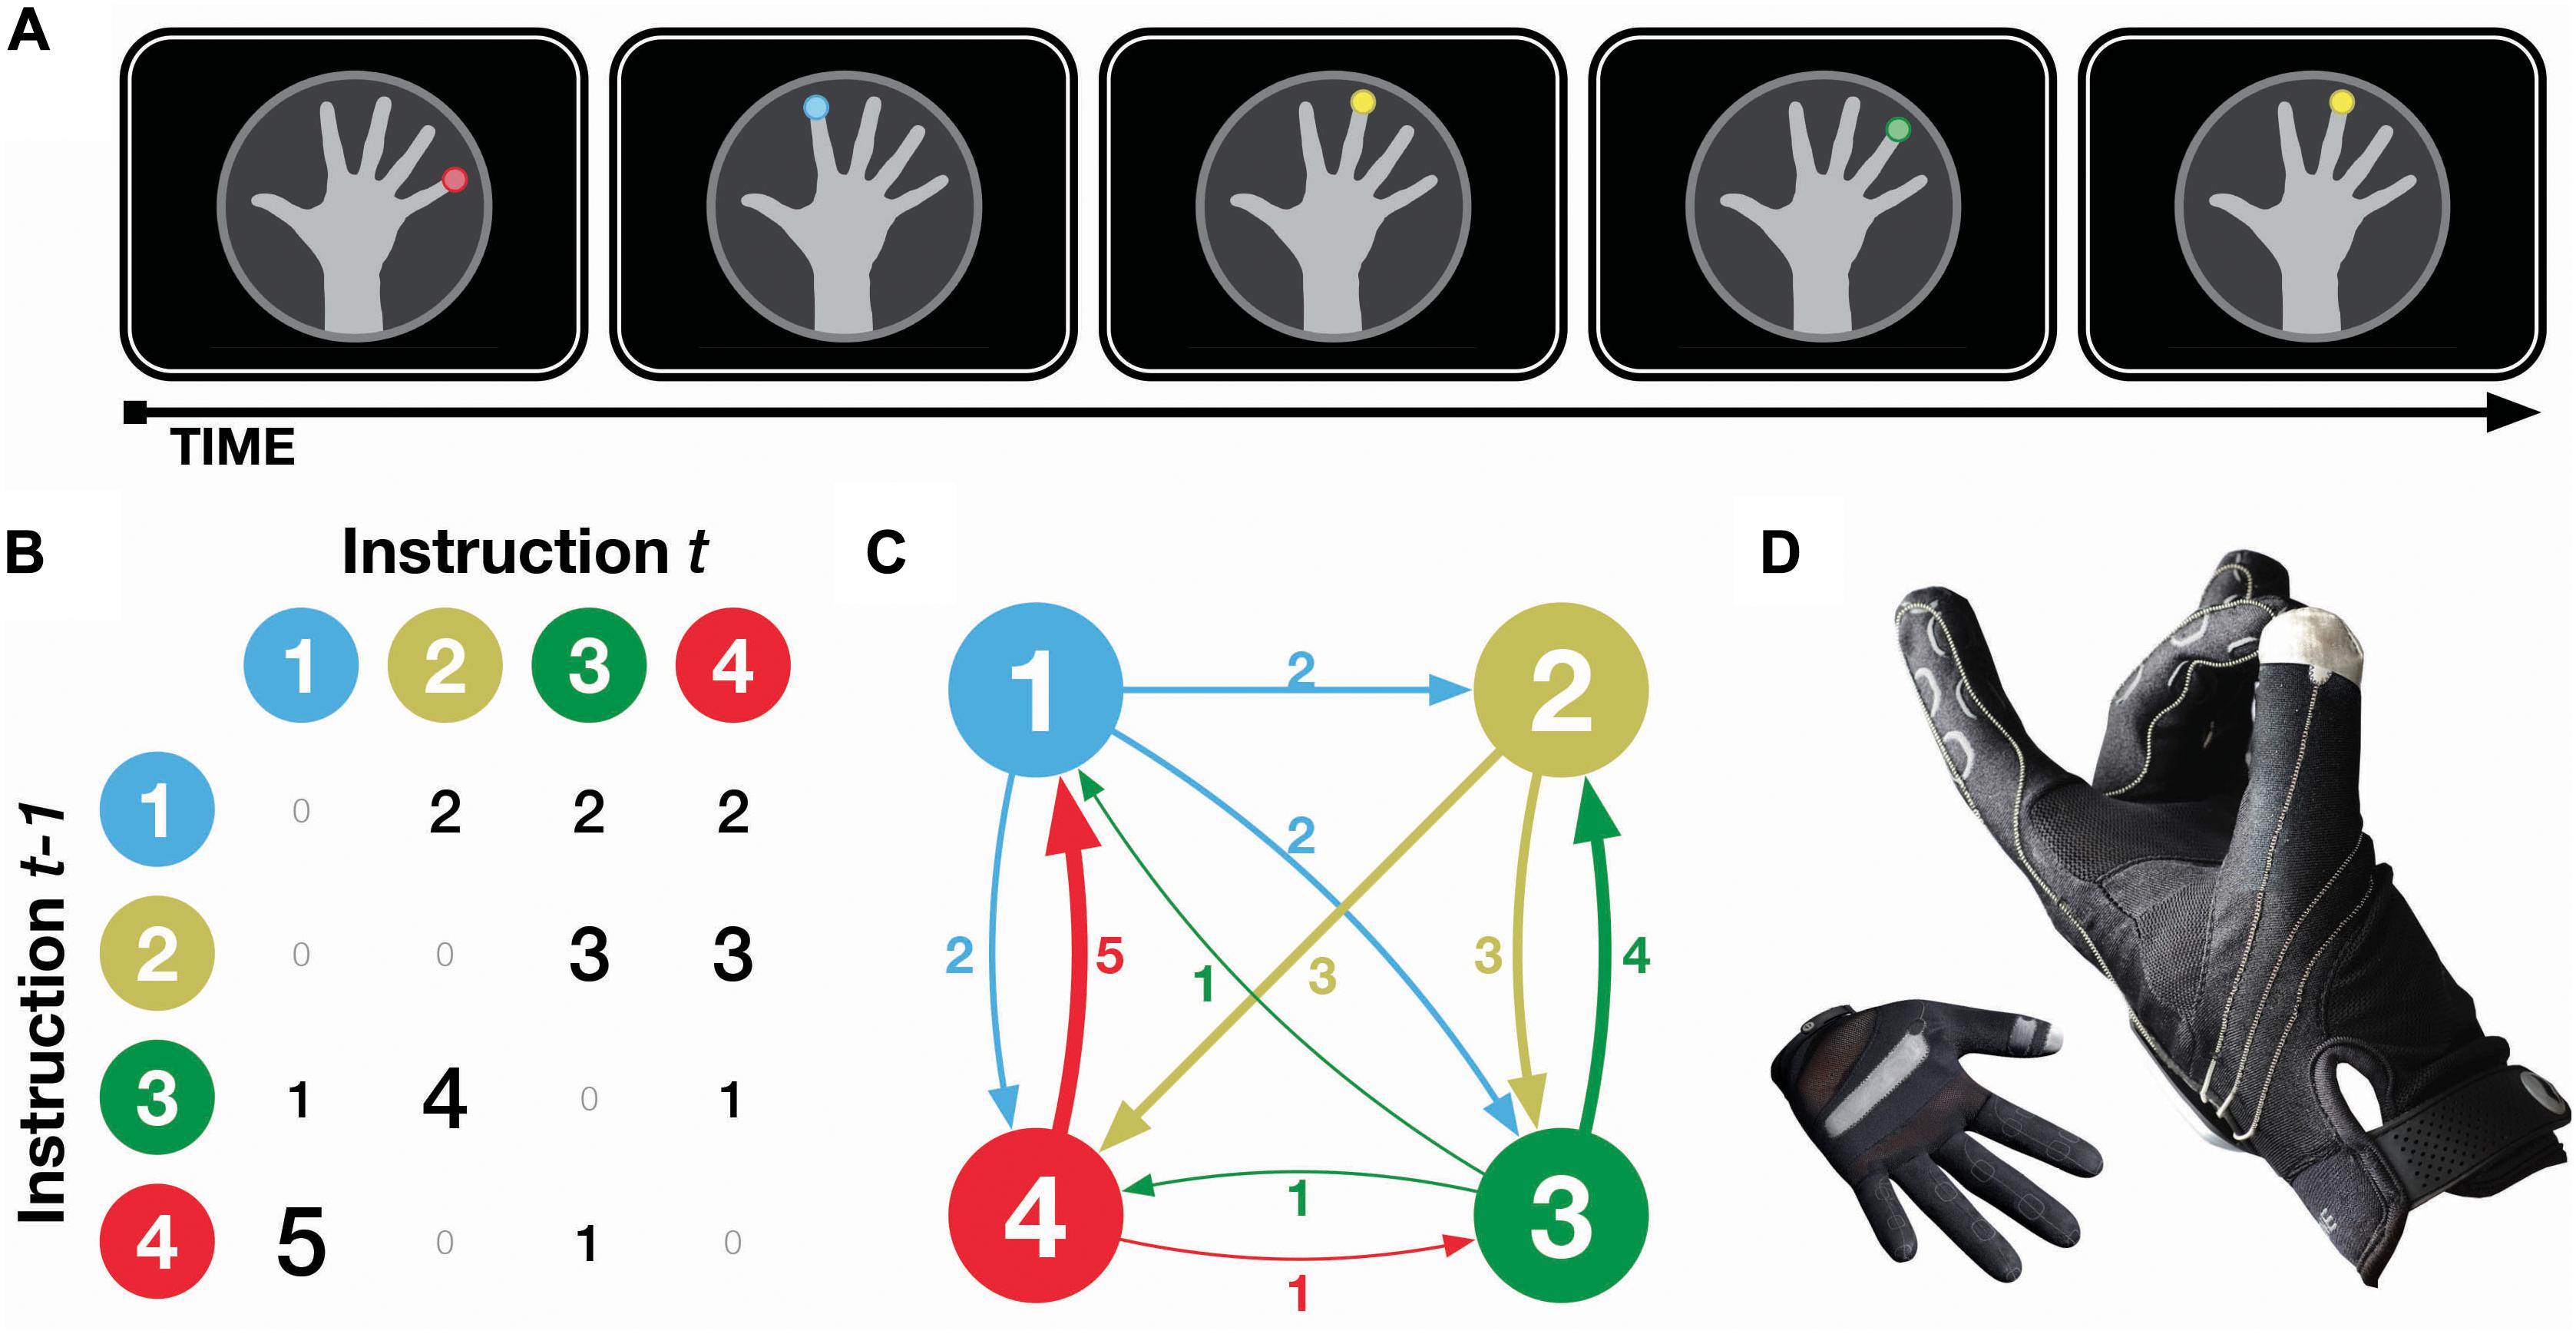 Convergent and Distinct Effects of Multisensory Combination on Statistical Learning Using a Computer Glove